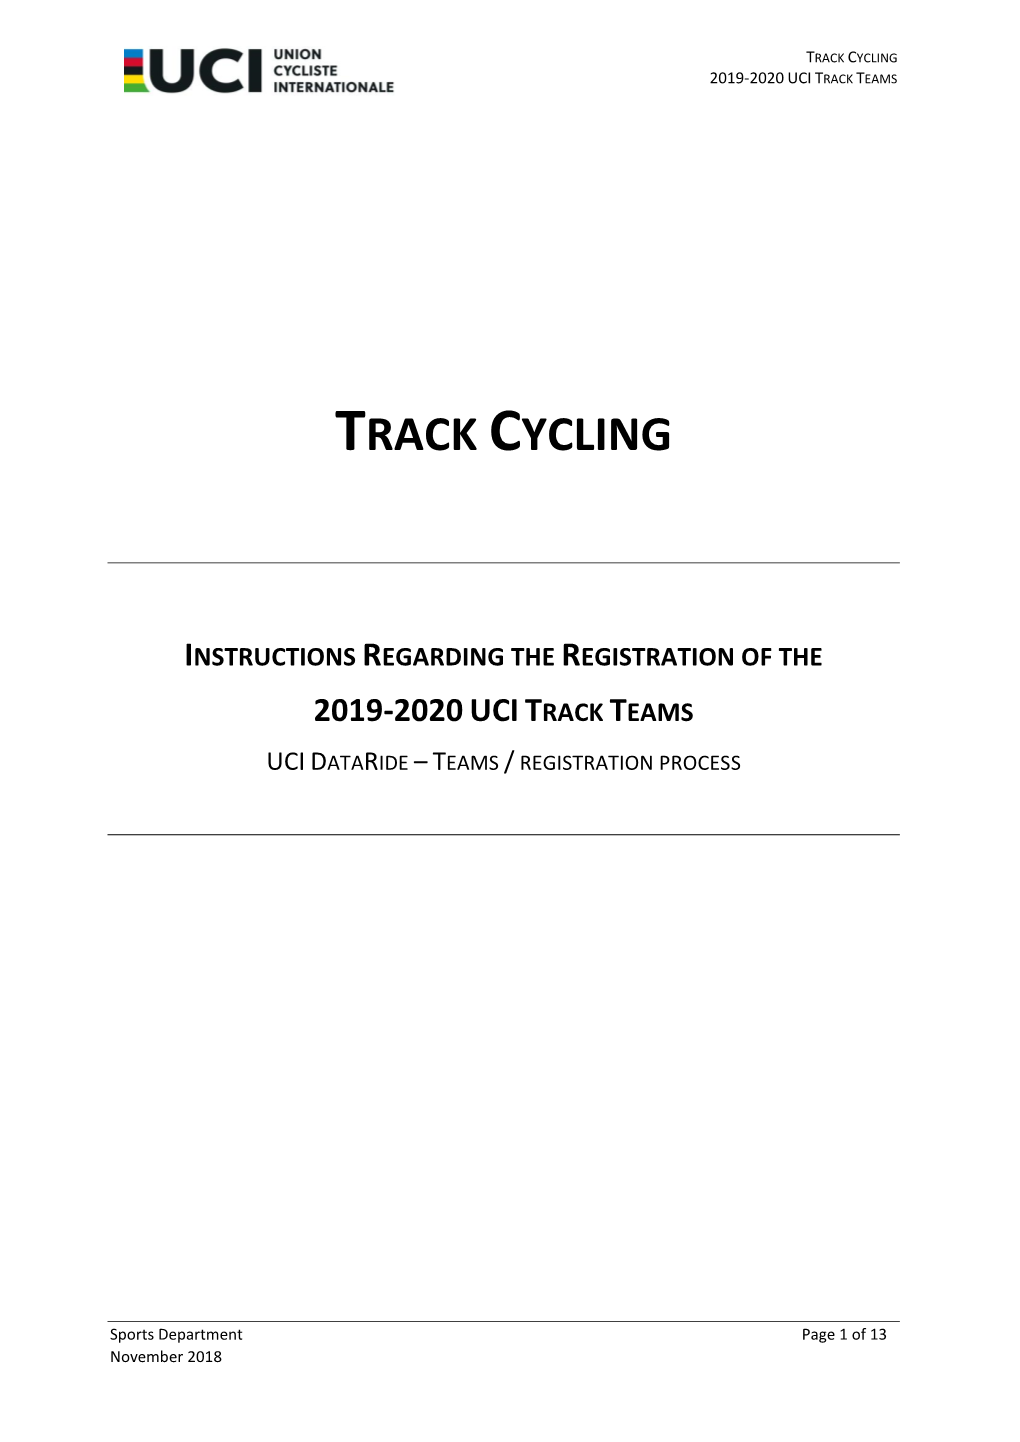 Track Cycling 2019-2020 Uci Track Teams